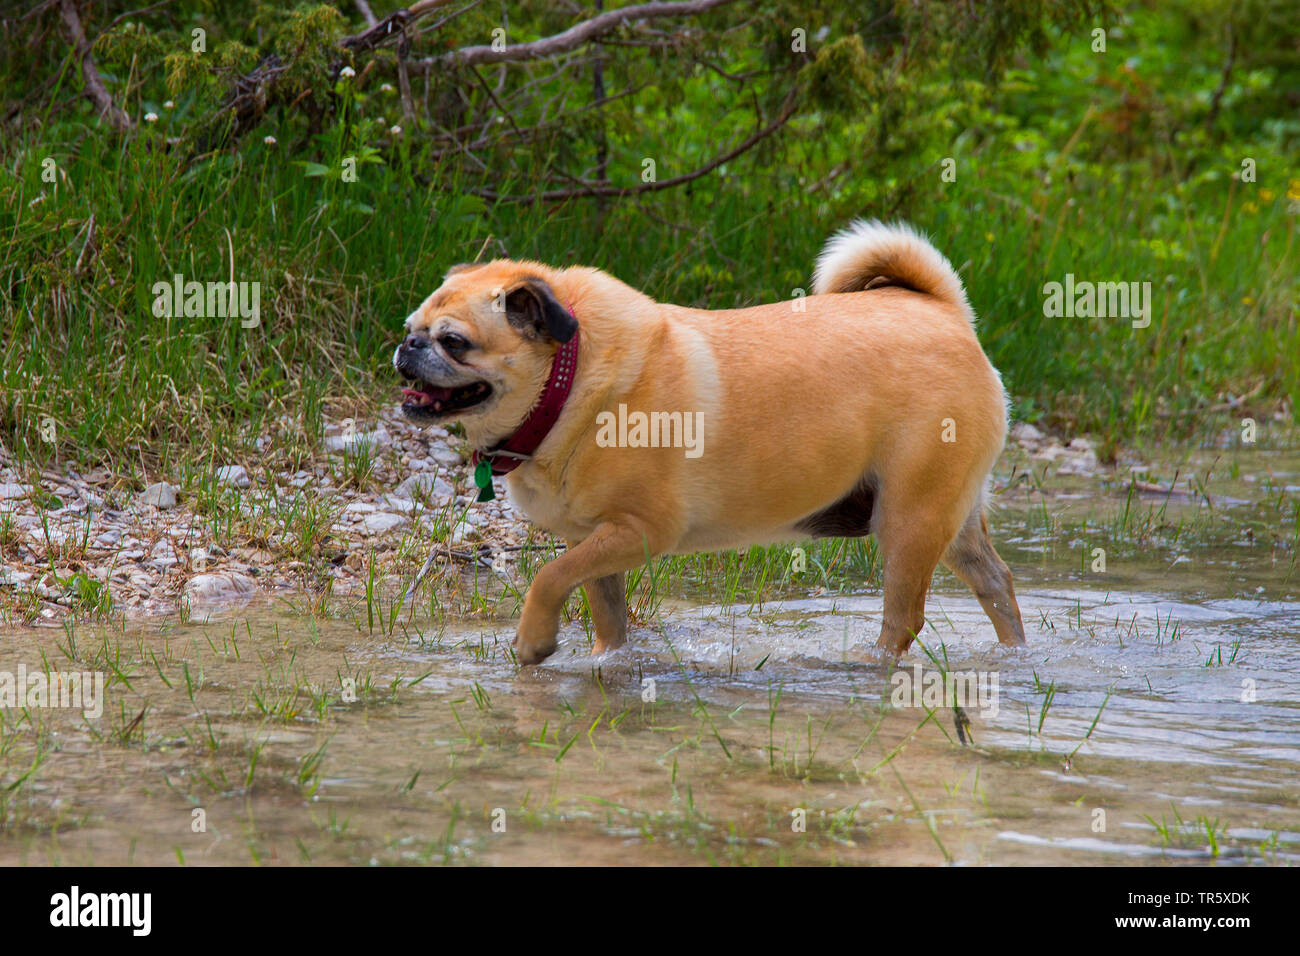 Pug (Canis lupus f. familiaris), old she-dog walking through shallow water, side view, Germany Stock Photo